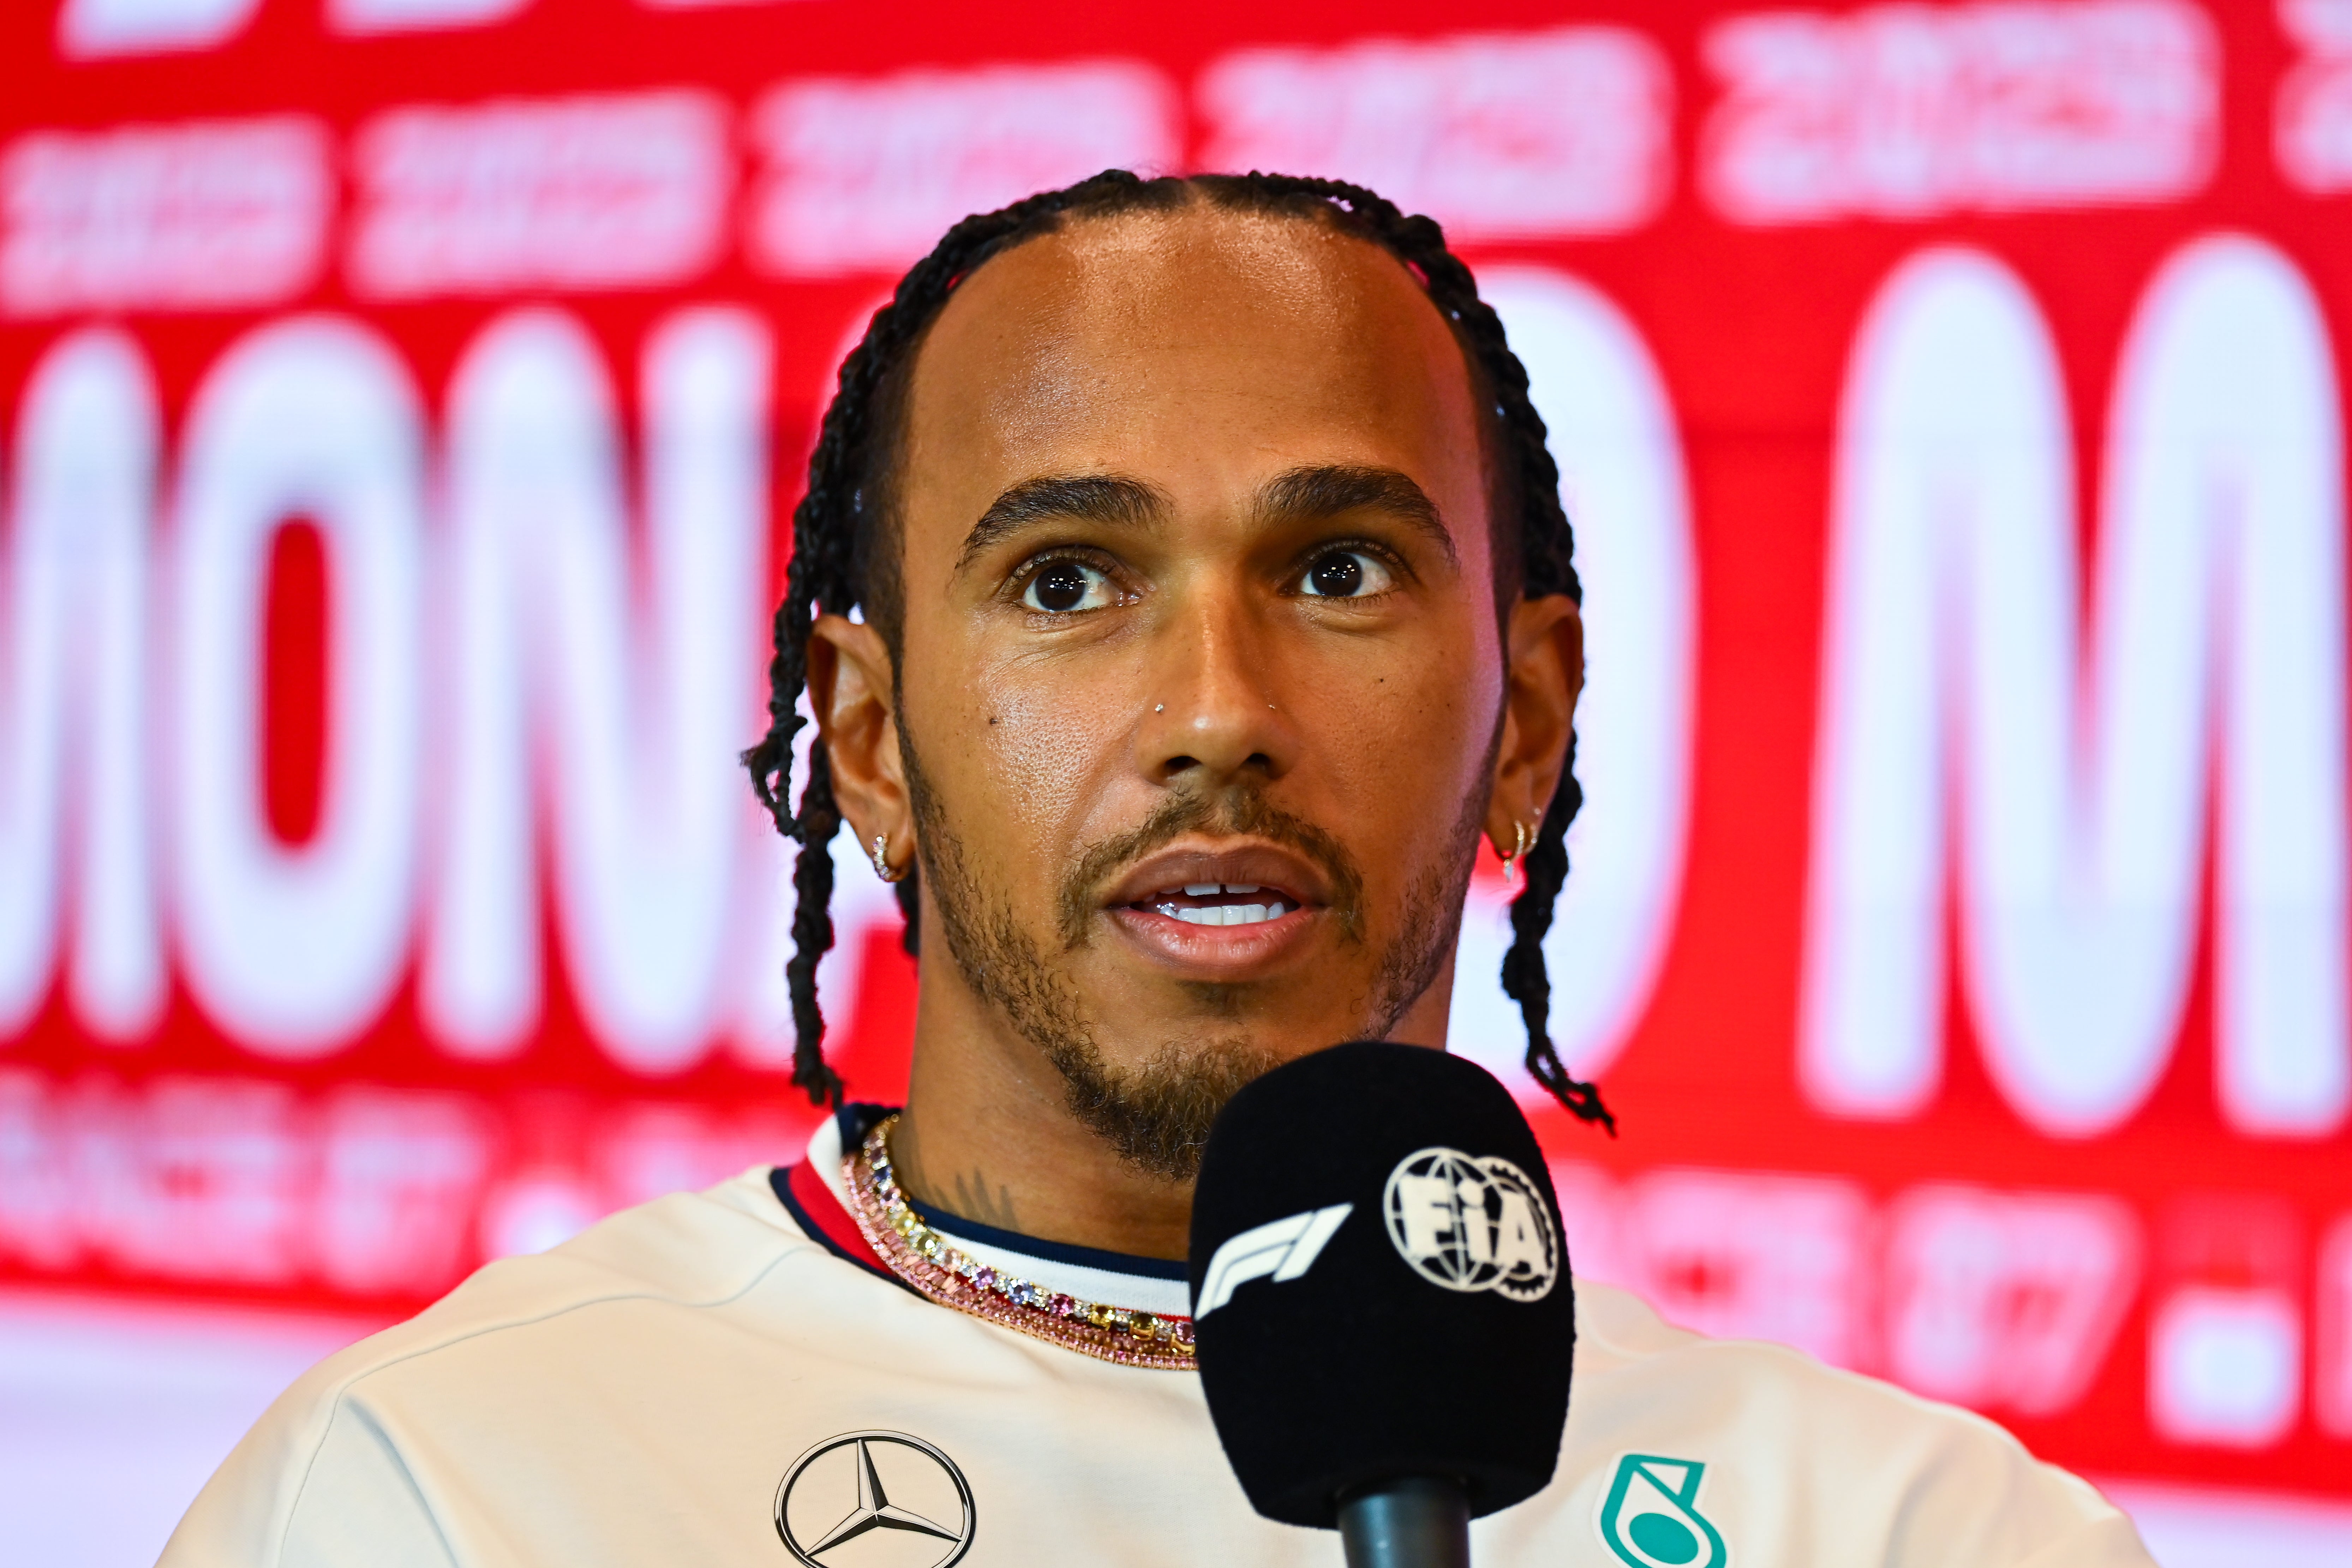 Lewis Hamilton re-affirmed his commitment to signing a new deal with Mercedes on Thursday